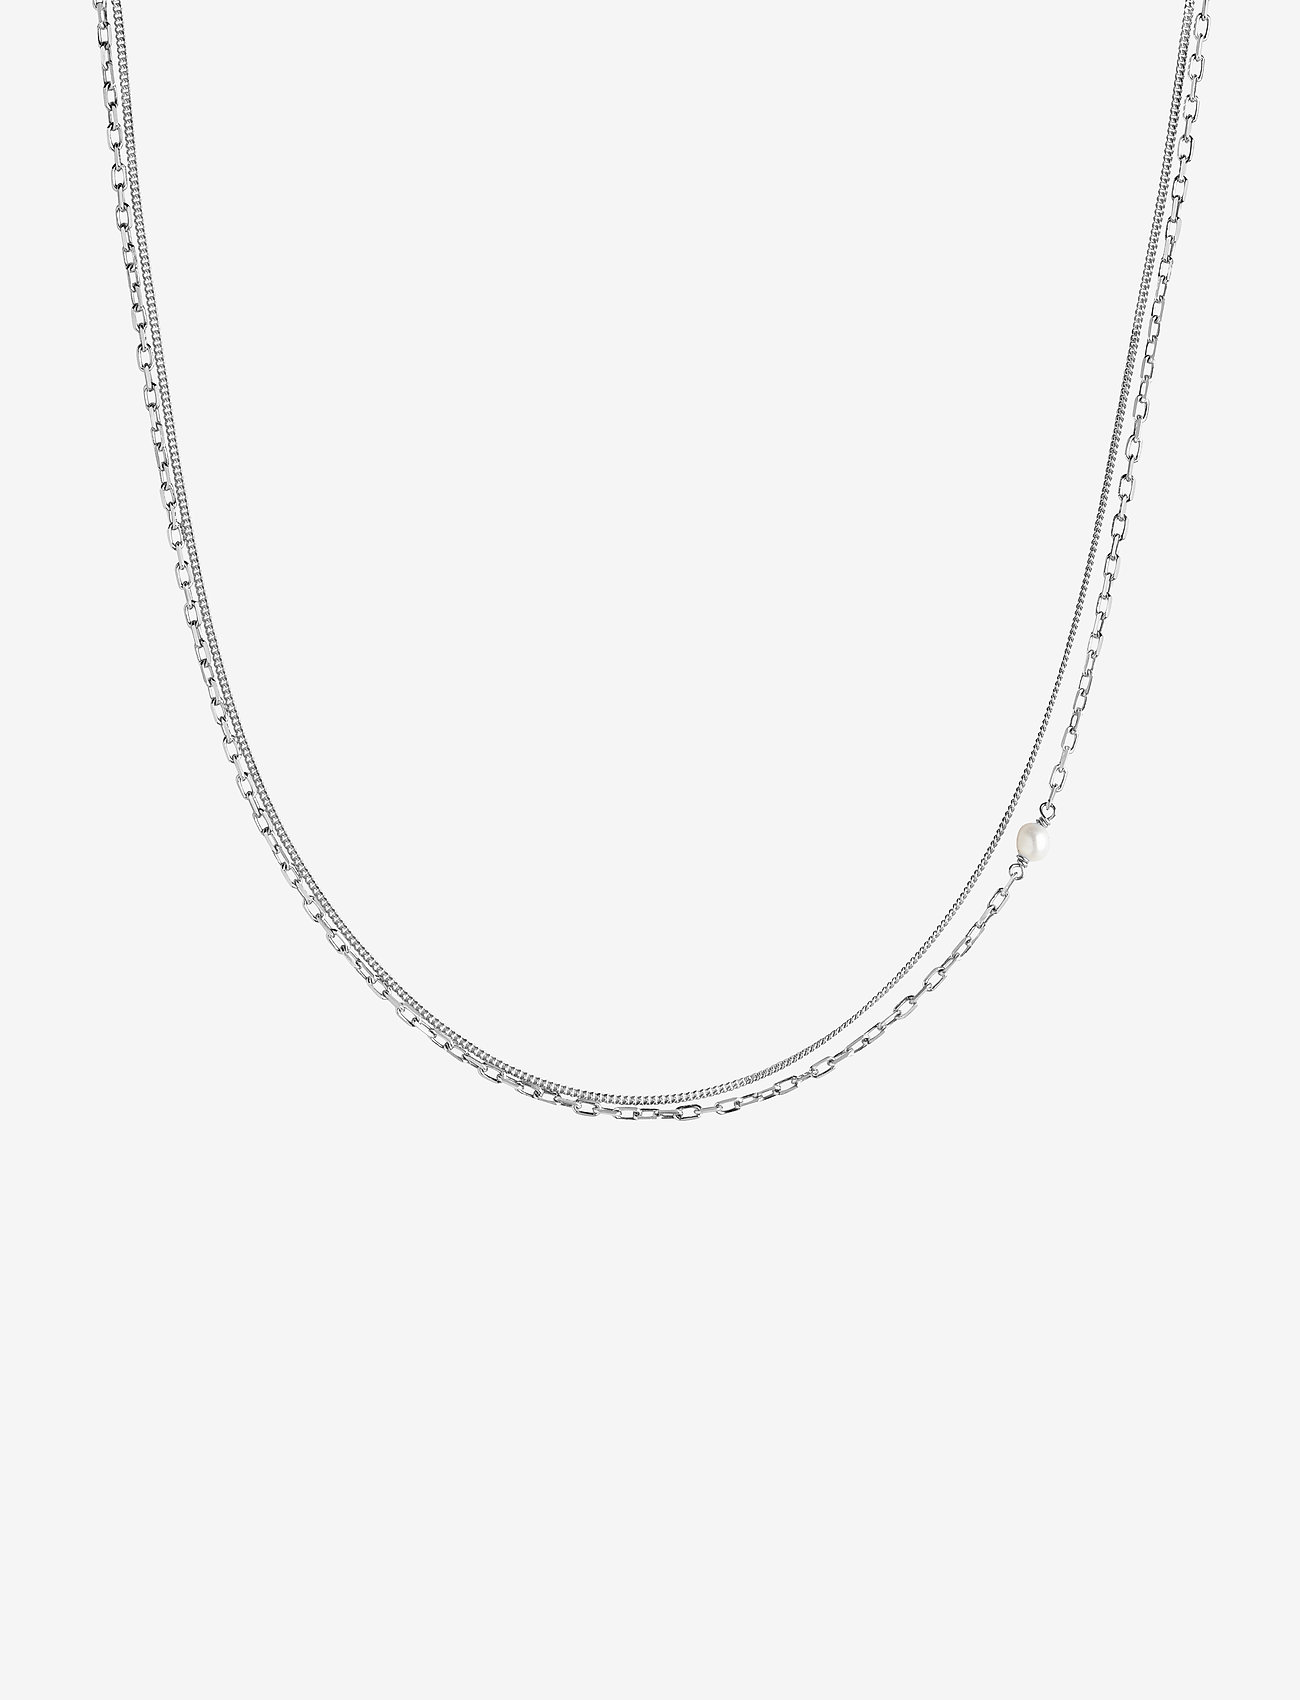 Maria Black - Cantare Necklace - parelketting - silver hp - 0